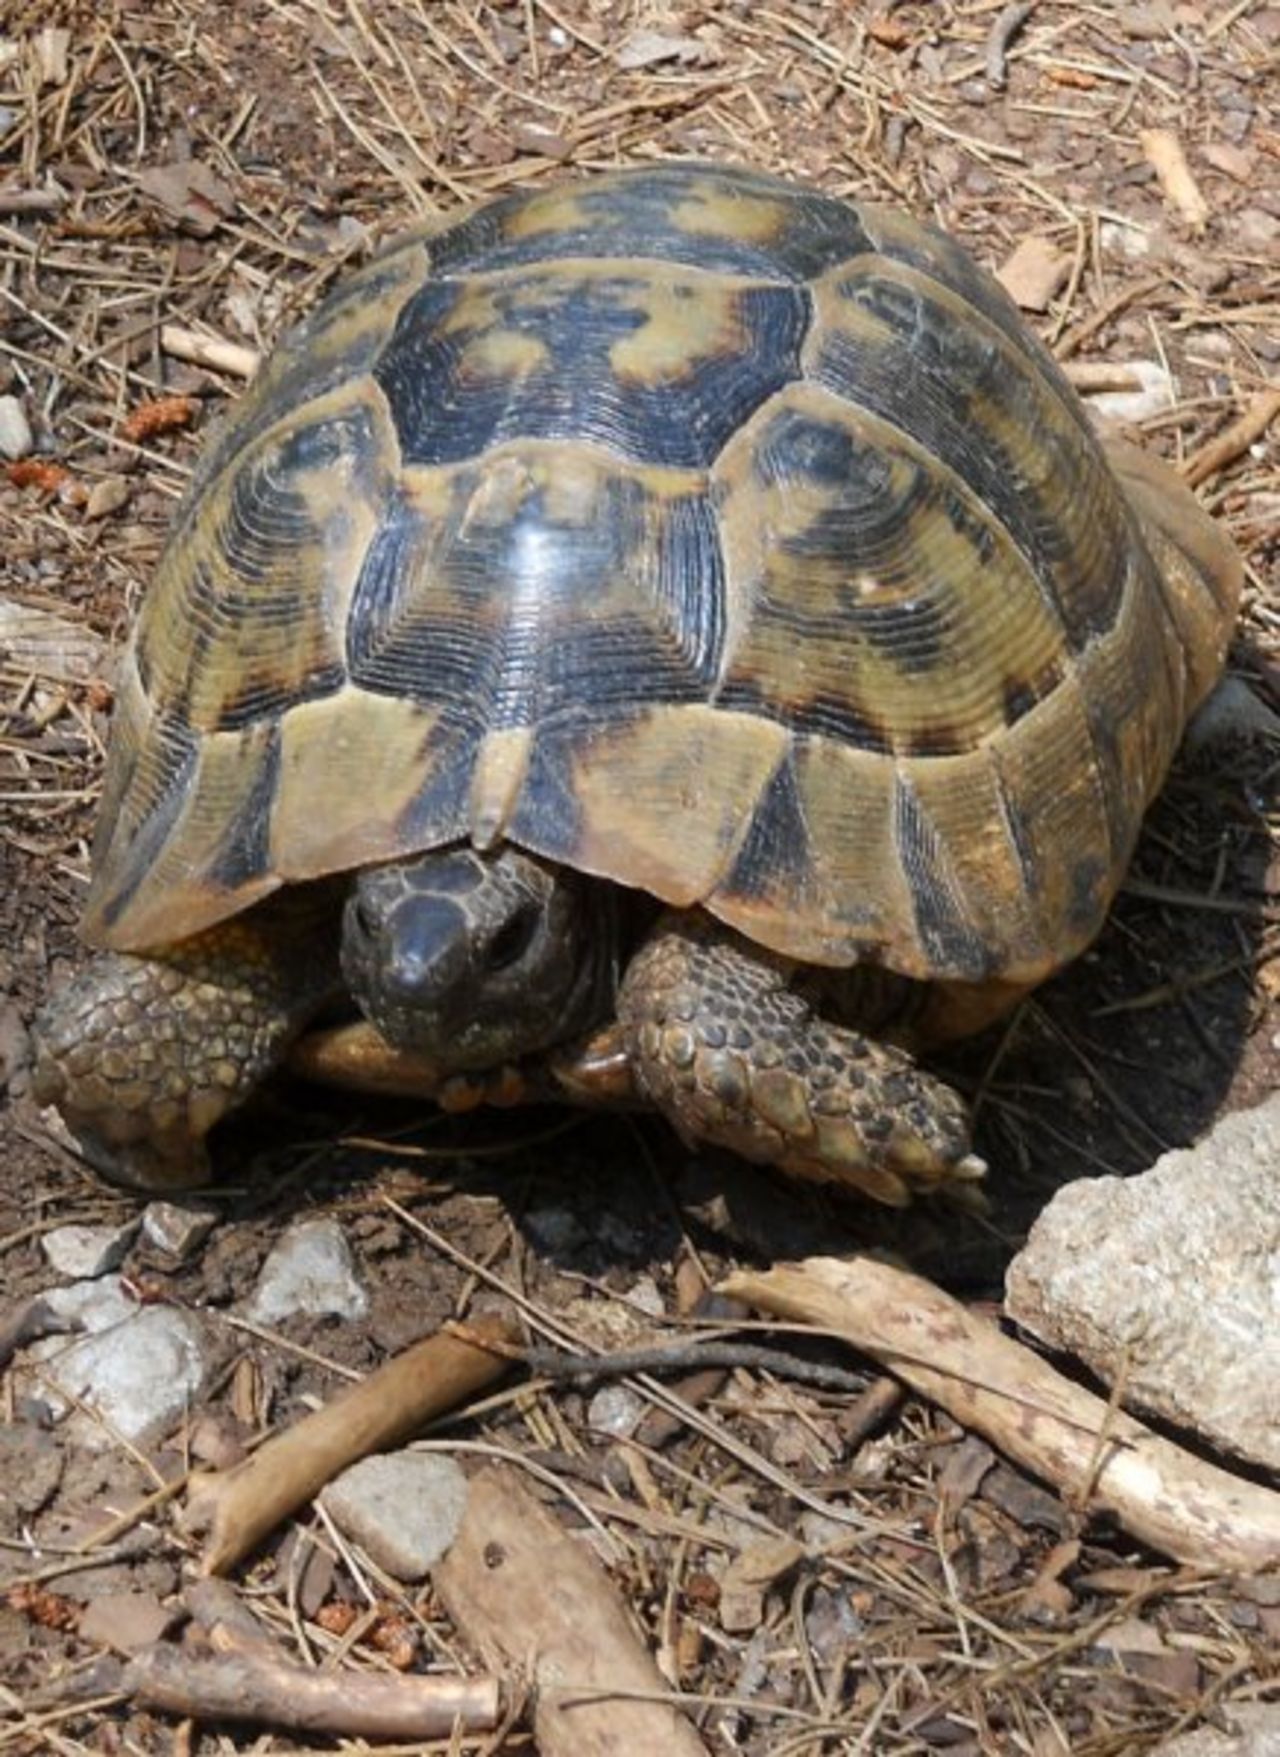 Ruin-spotting companion: one of several kinds of Turkish tortoise.